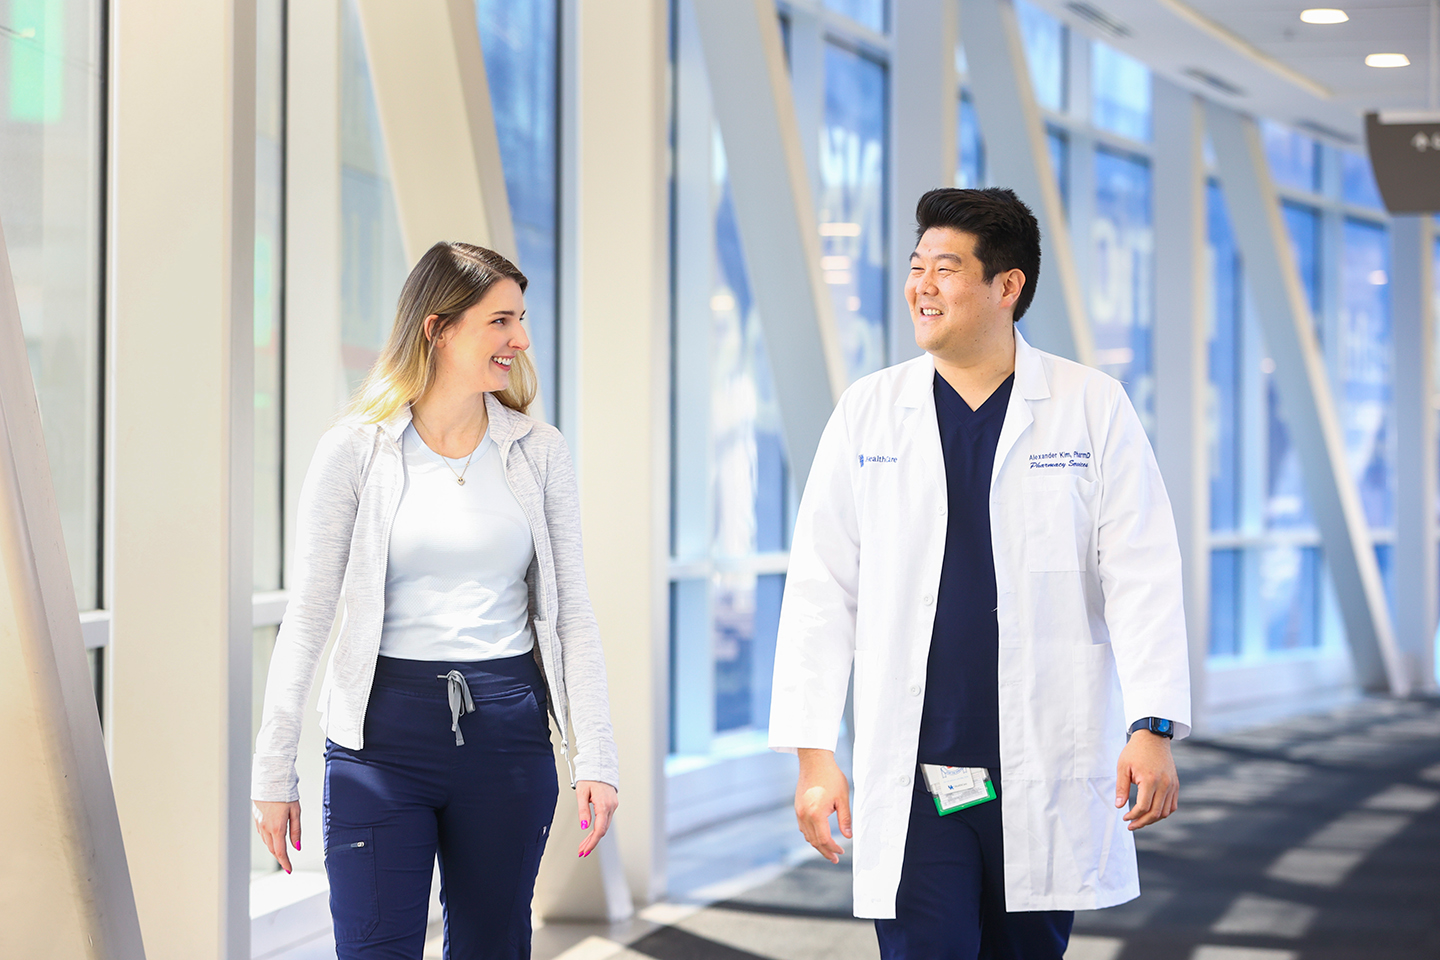 A candid image of pharmacist Alex Kim walking through a hallway in a healthcare setting with a patient. He is wearing a white lab coat over his blue scrubs.